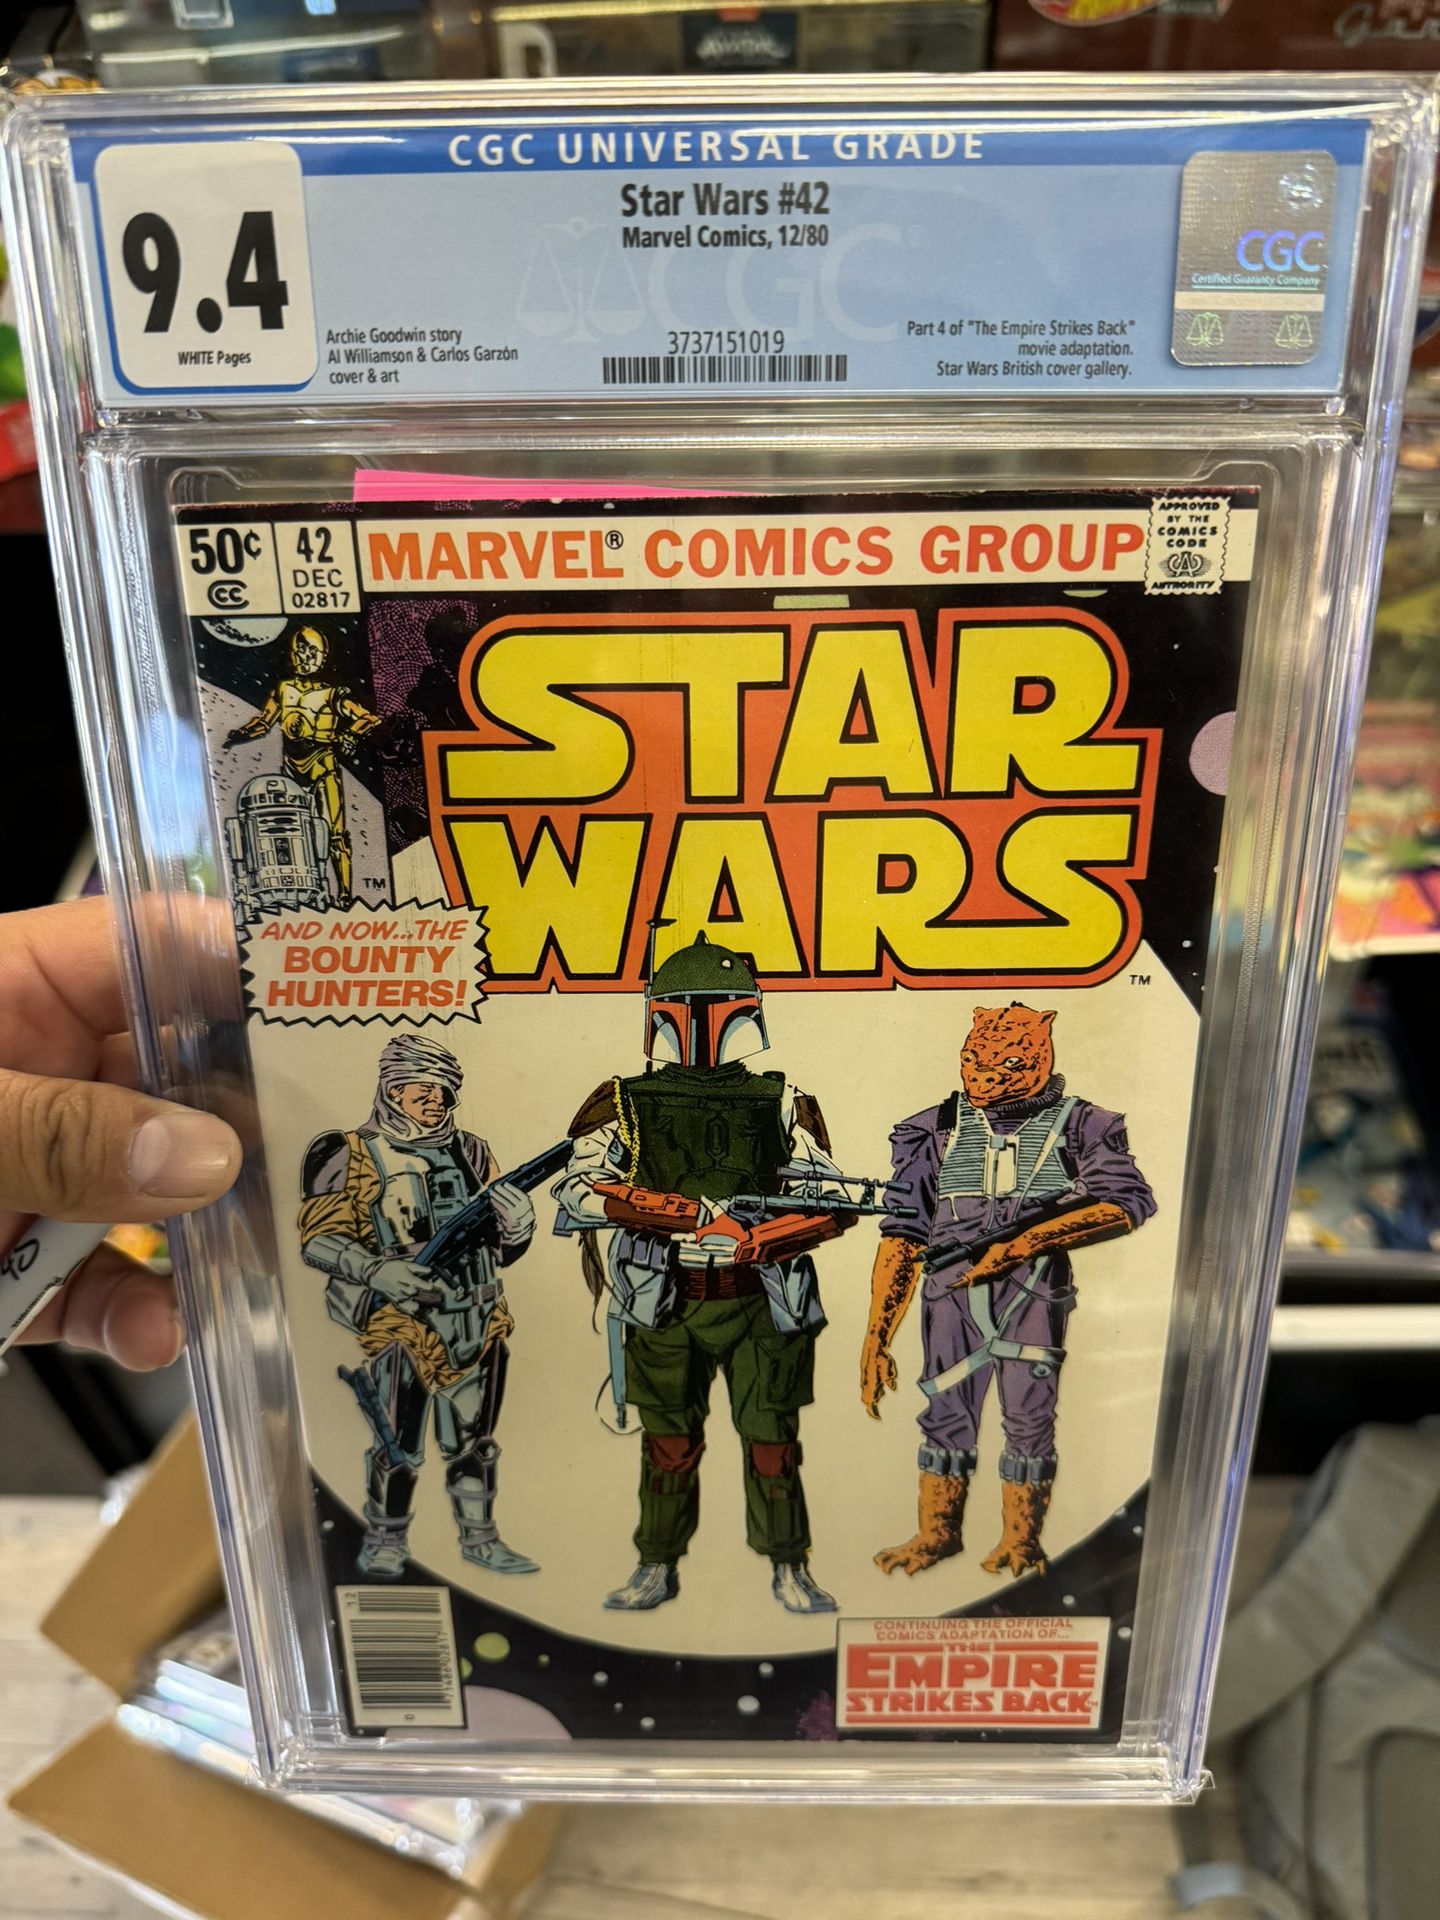 Vintage Comic books And collectibles